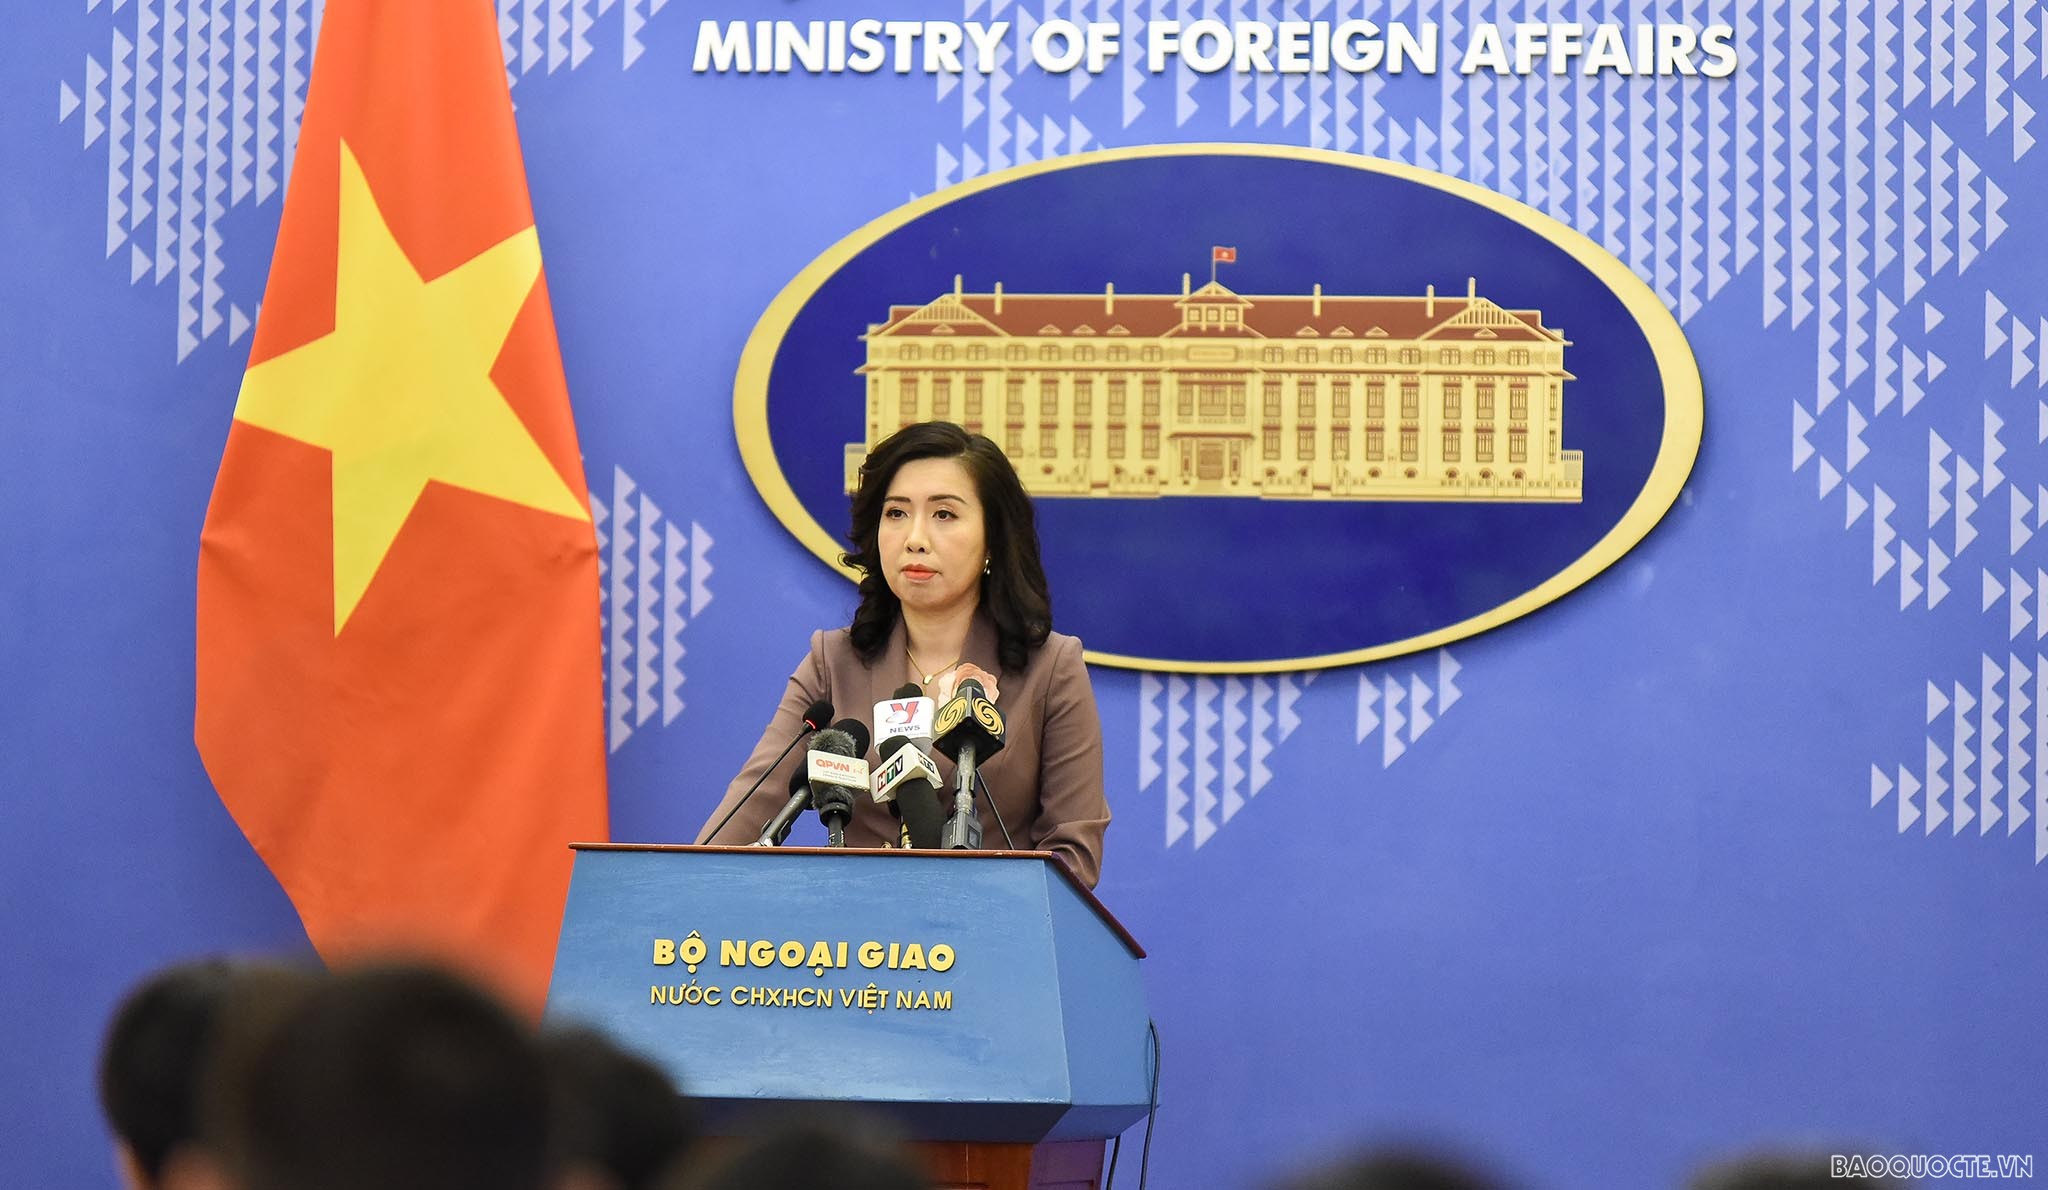 Review on external affairs from June 20-26: Celebrating 55 years of Vietnam-Cambodia ties; Elevating cooperation with Mozambican NA.